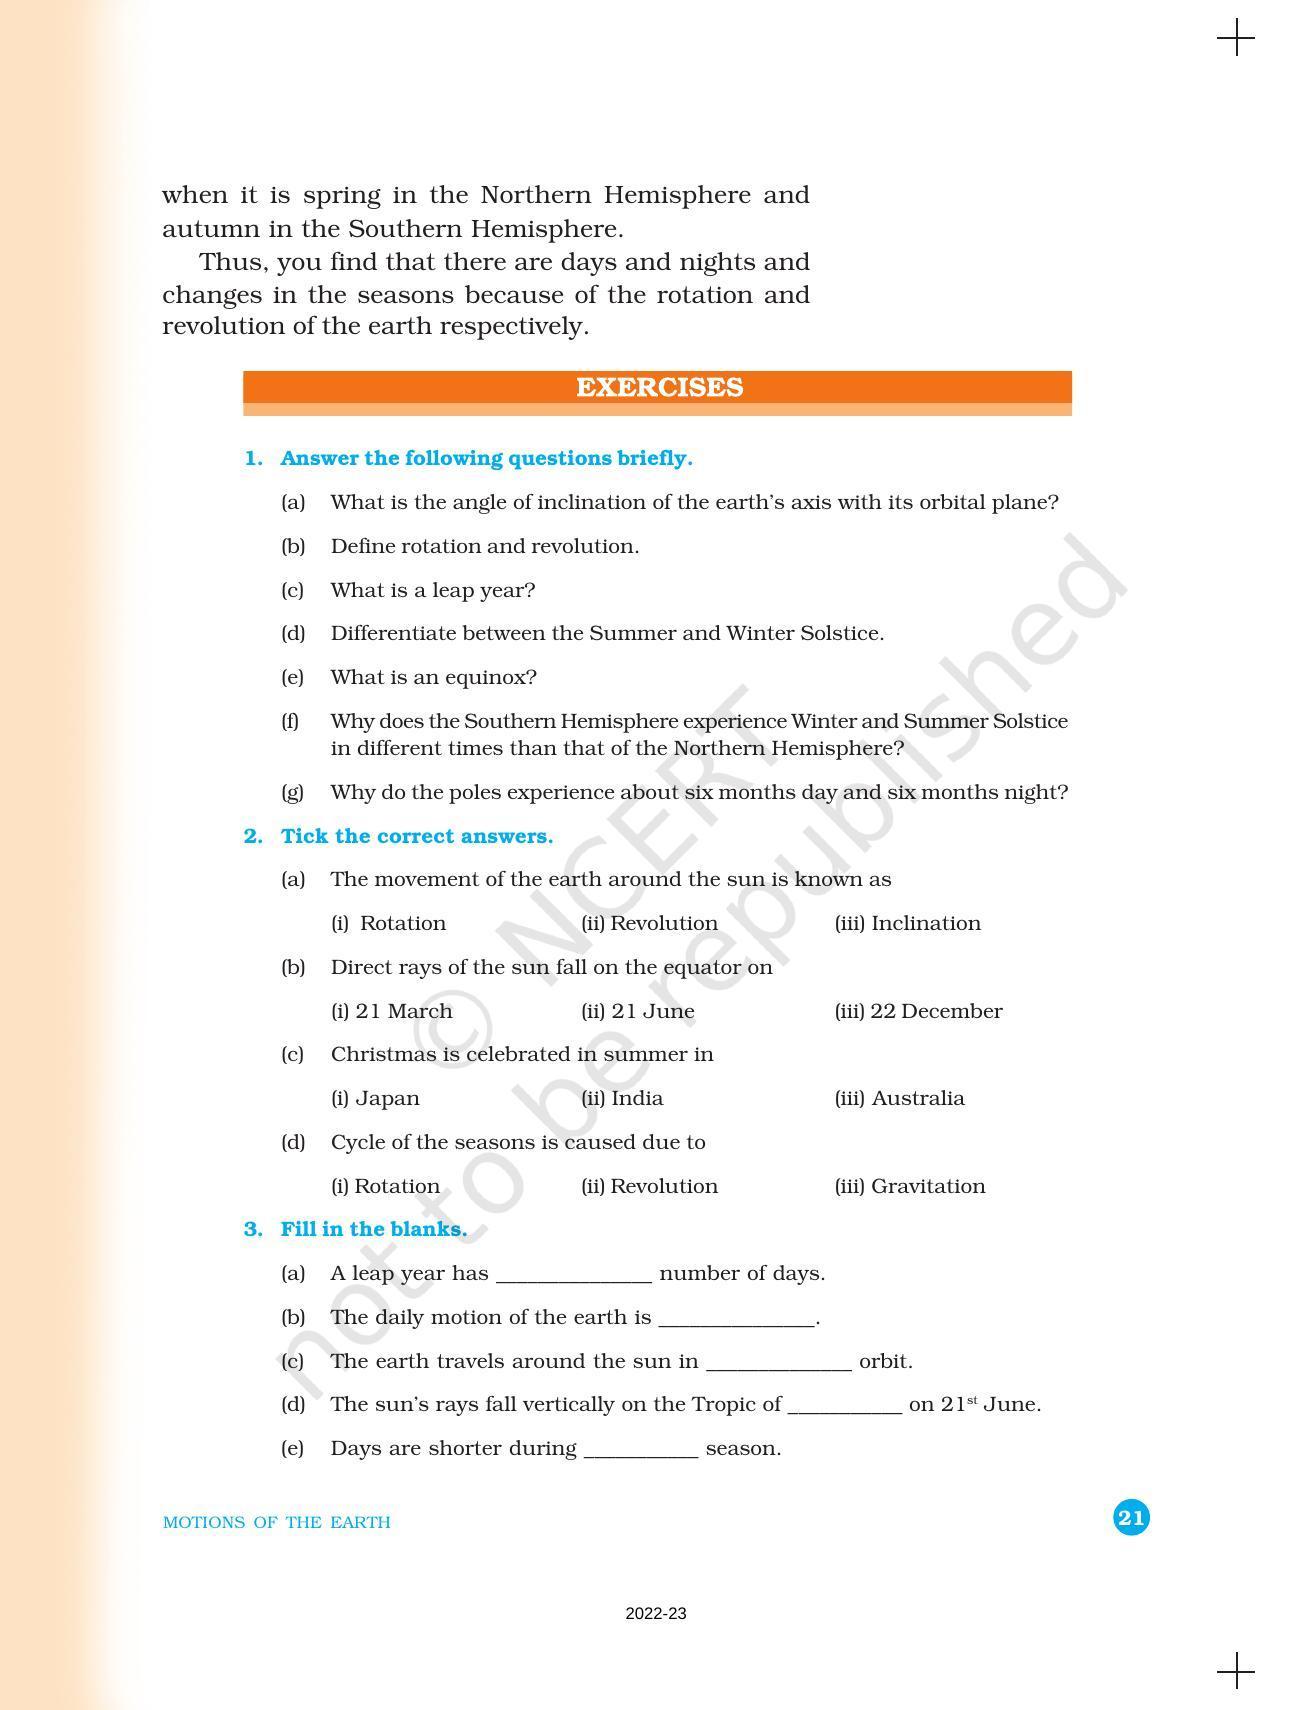 NCERT Book for Class 6 Social Science(Geography) : Chapter 3-Motions of the Earth - Page 4